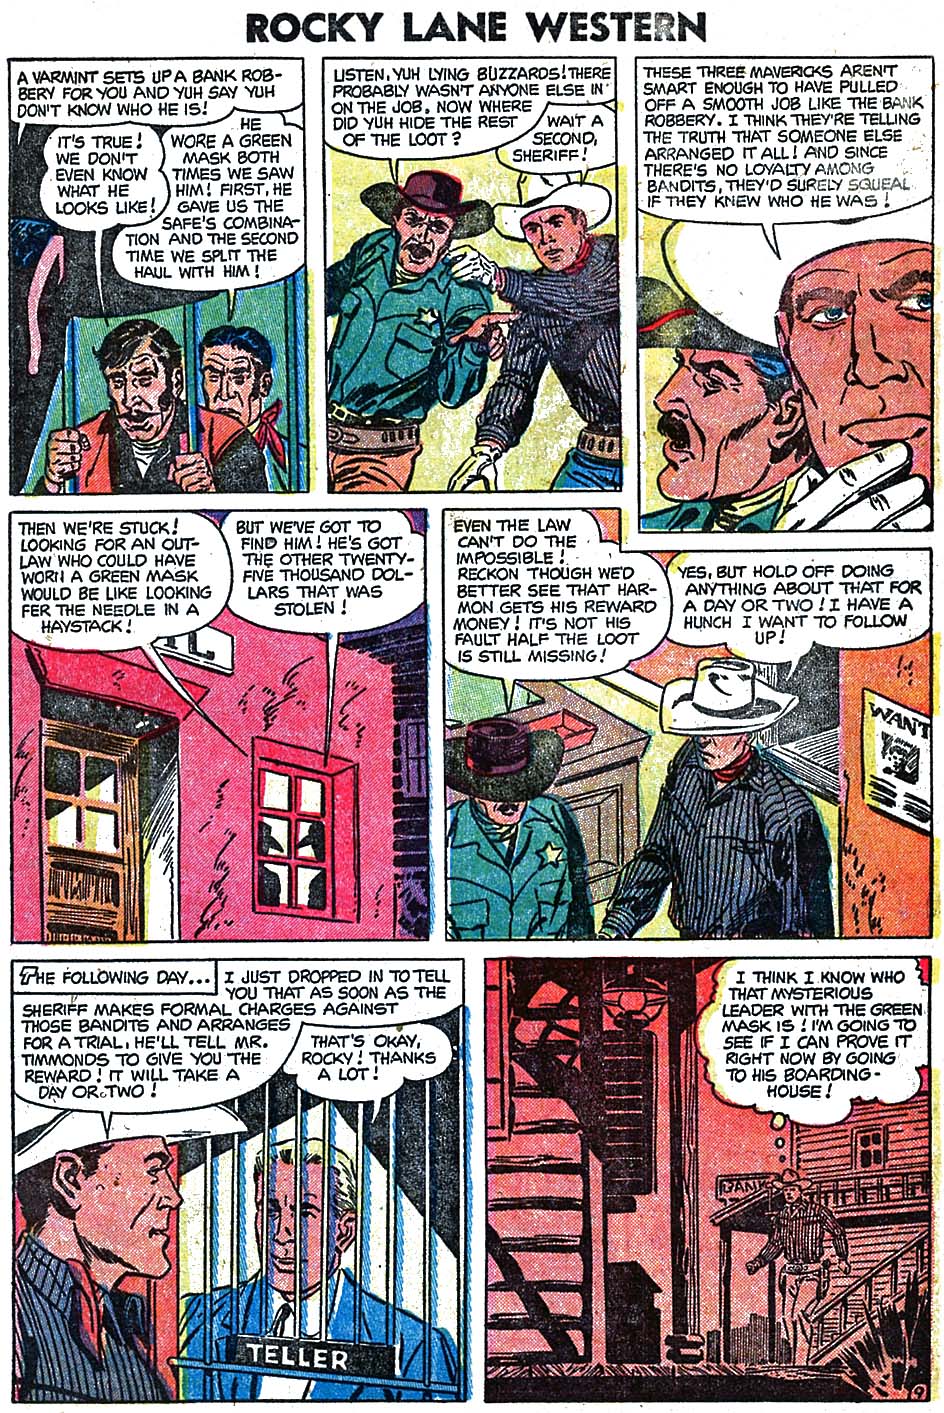 Rocky Lane Western (1954) issue 60 - Page 10